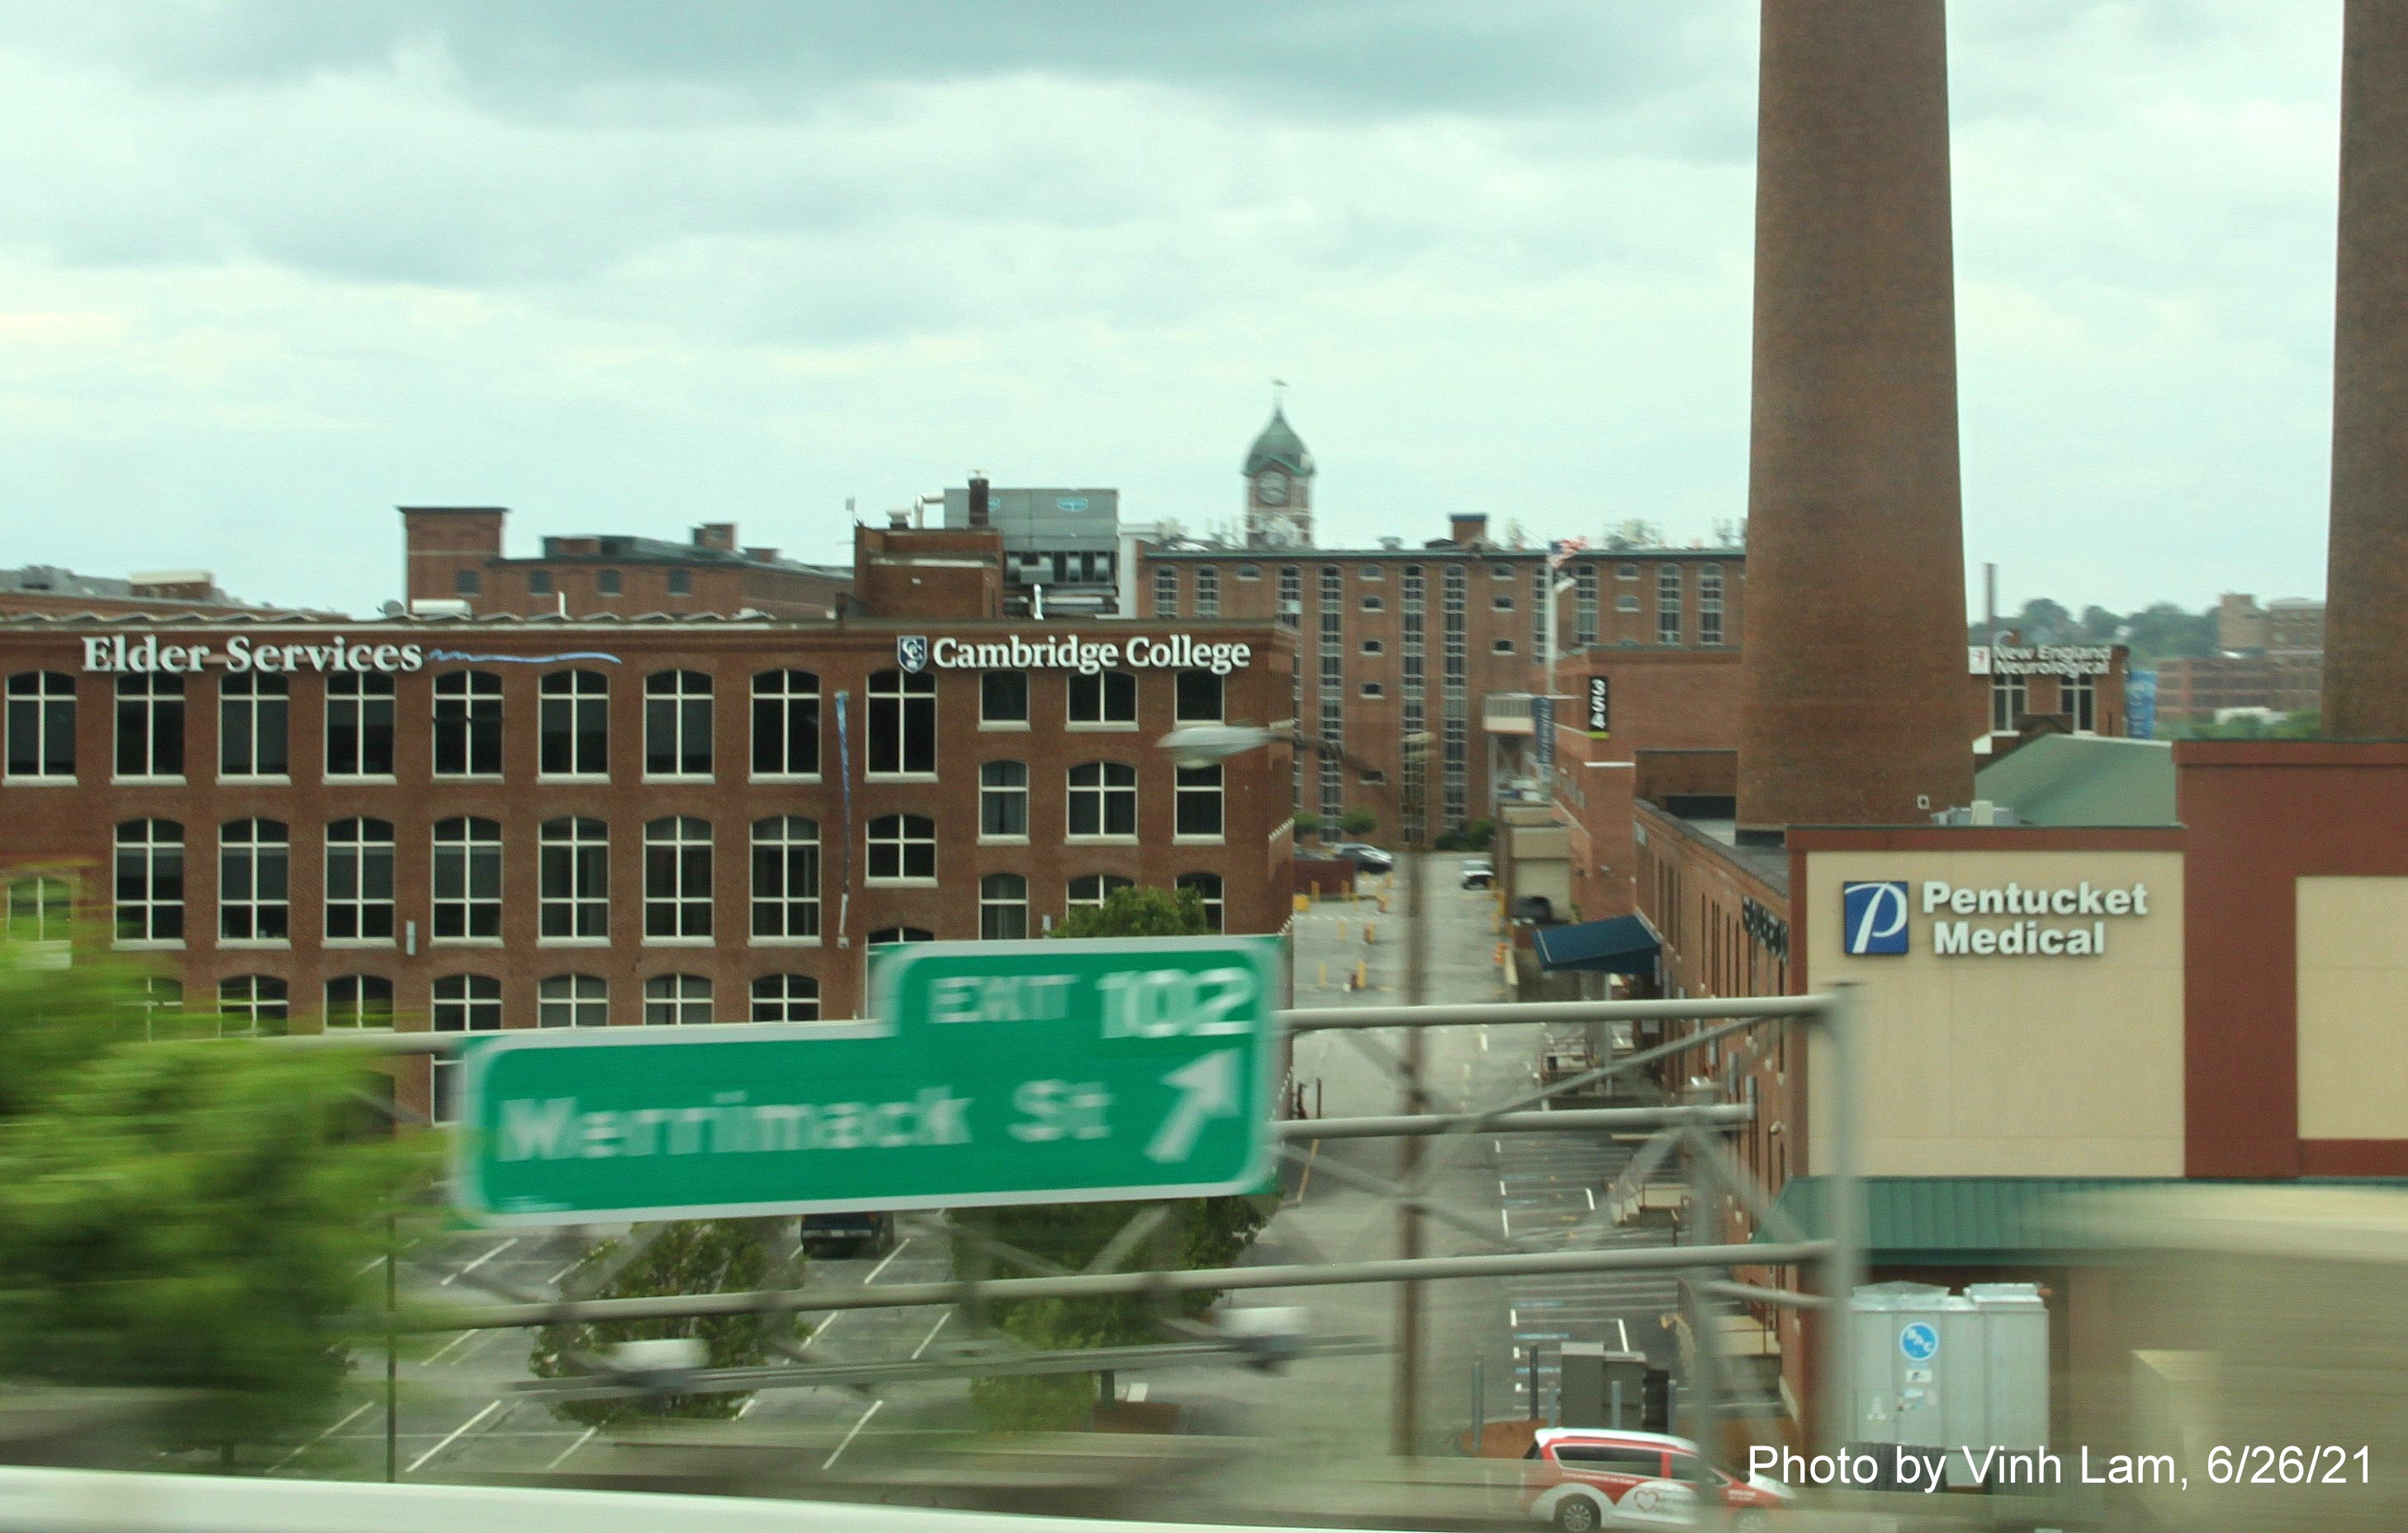 Image of overhead ramp sign for Merrimack Street exit with new milepost based exit number as seen from I-495 South in Lawrence, by Vinh Lam, June 2021